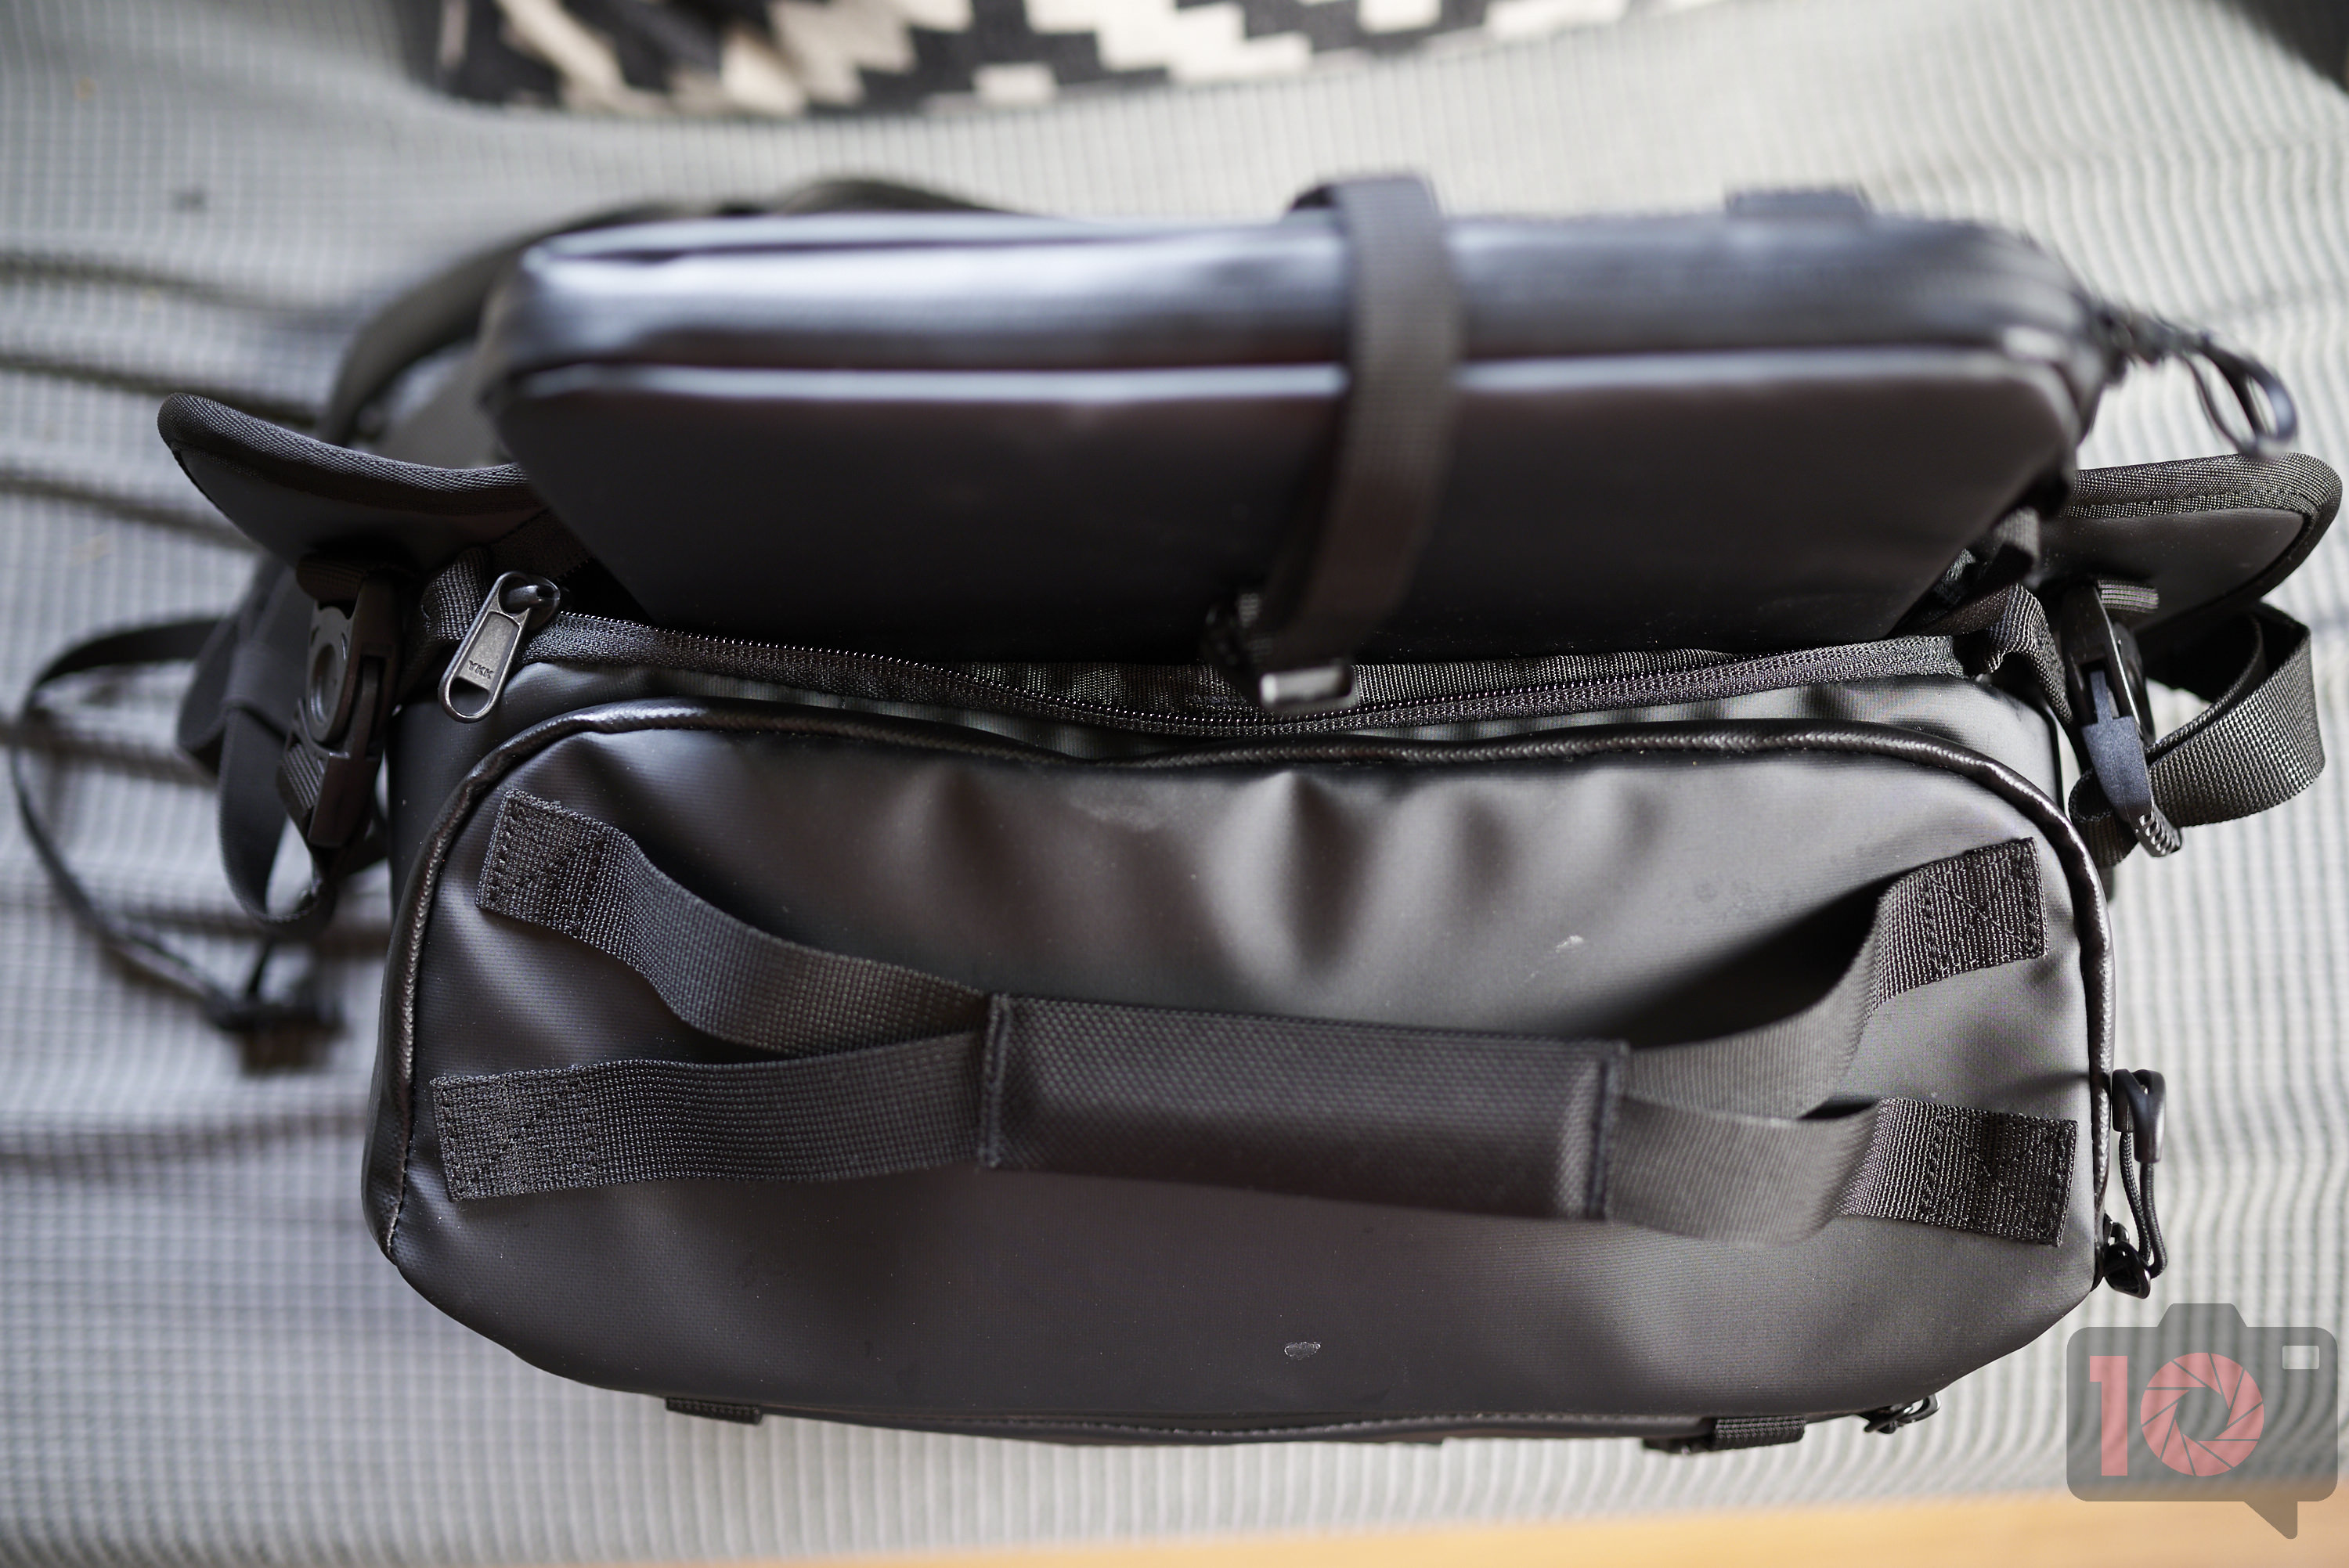 Is the WANDRD ROAM 9L Camera Bag Really That Great?